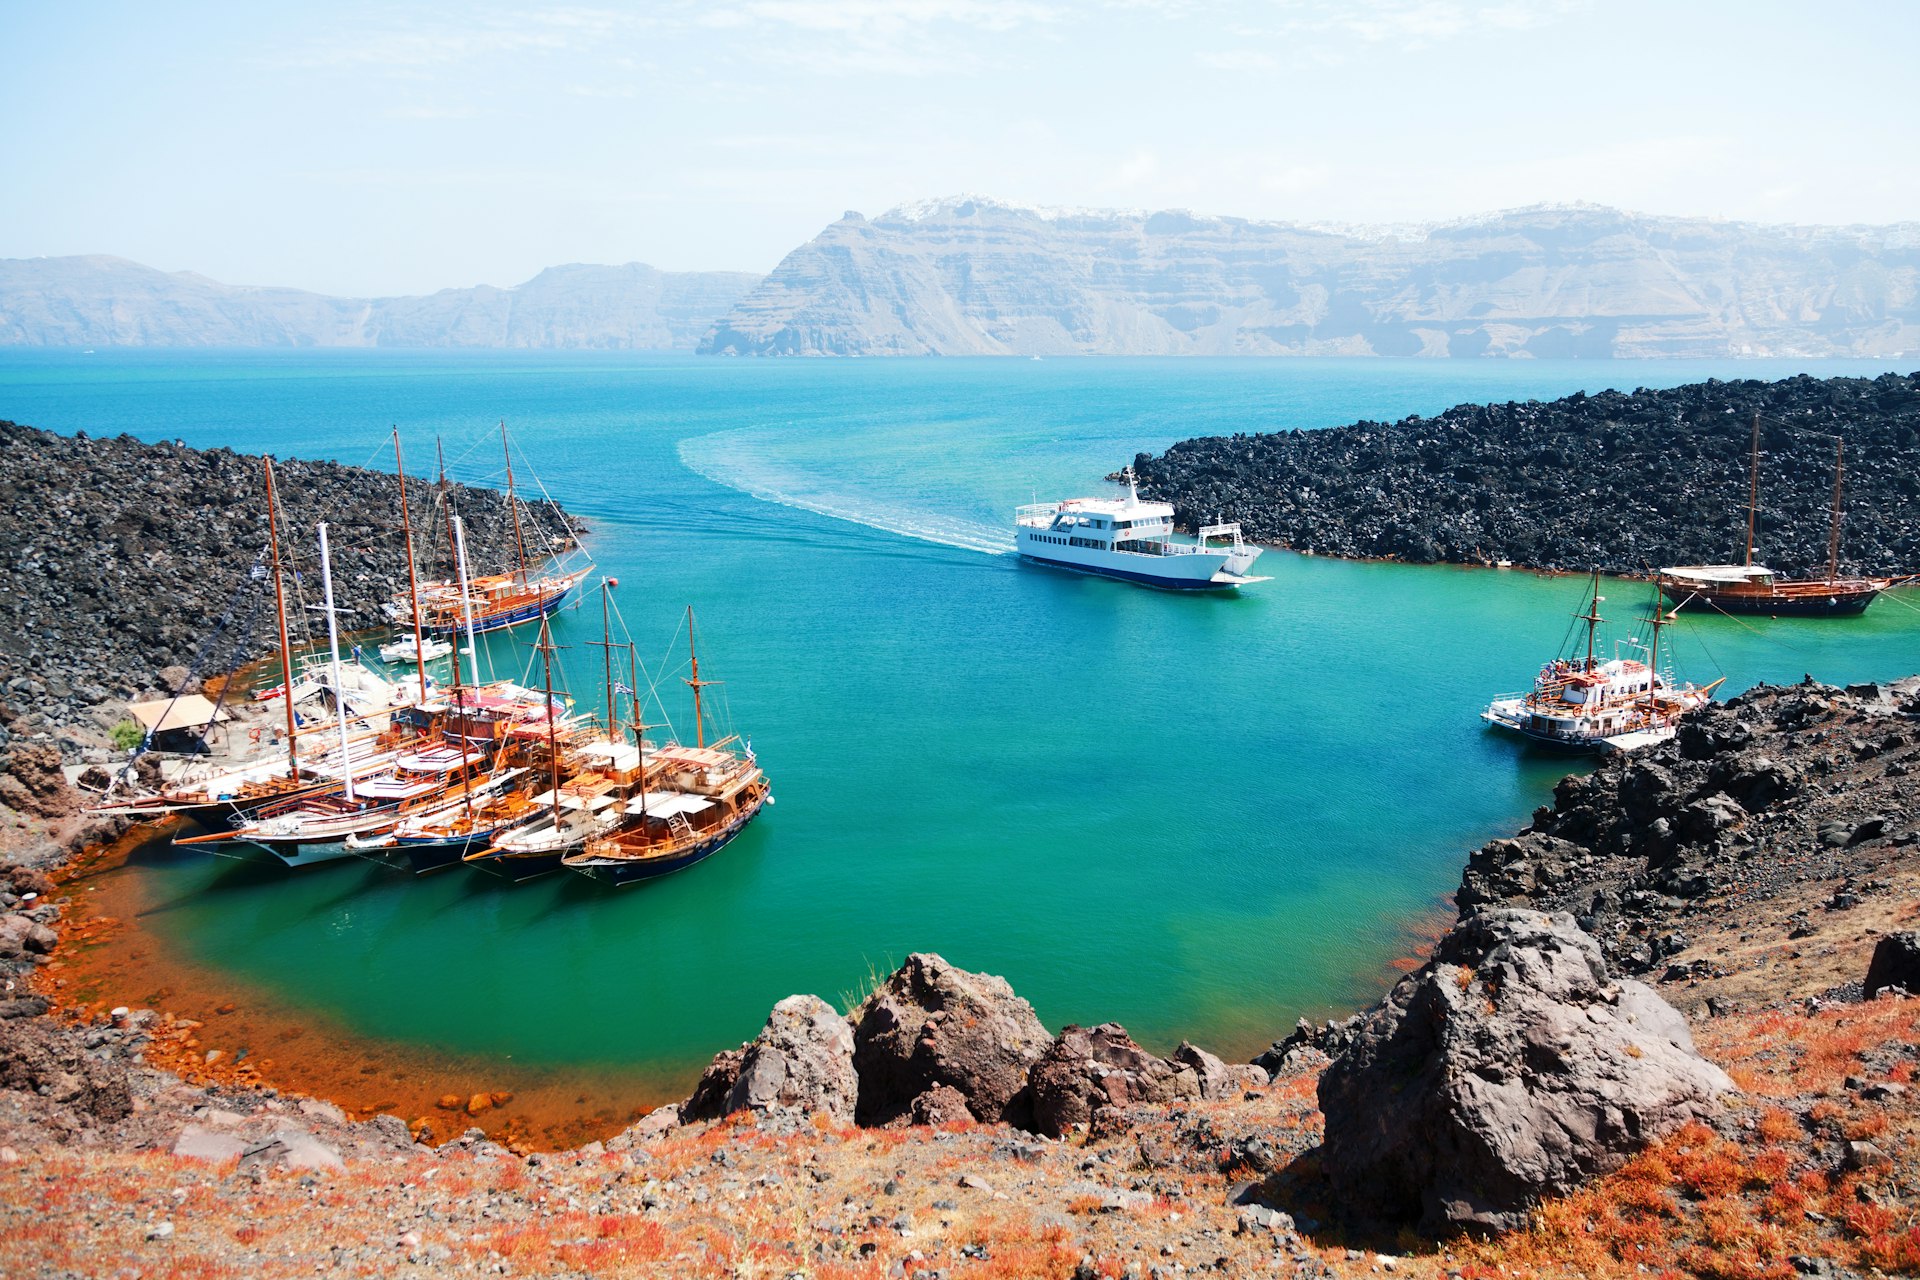 A bay of a volcanic island, with several boats coming into the small harbor